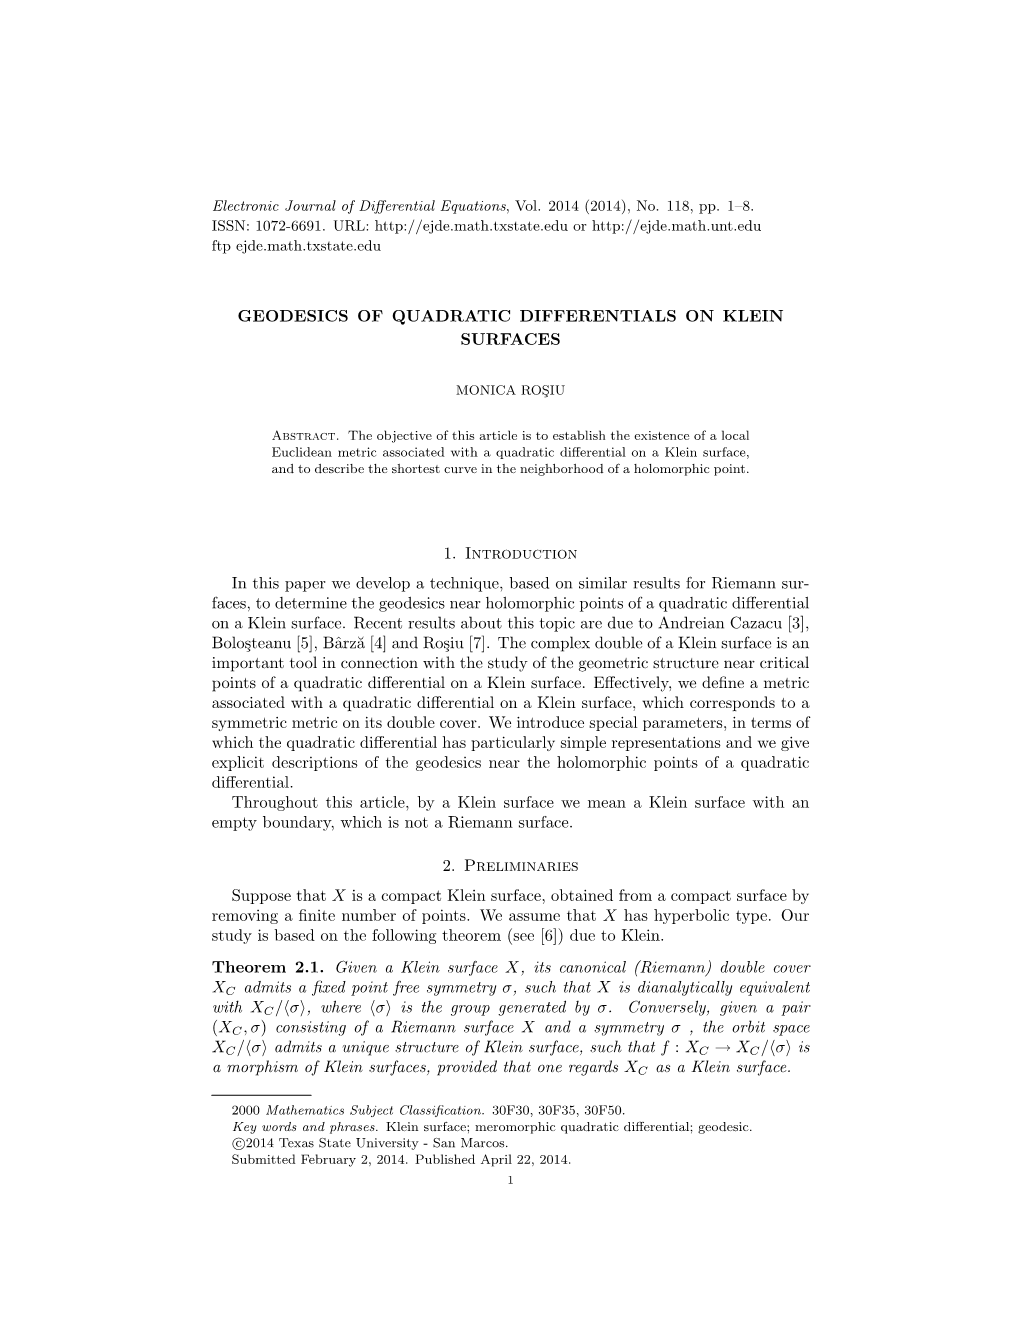 GEODESICS of QUADRATIC DIFFERENTIALS on KLEIN SURFACES 1. Introduction in This Paper We Develop a Technique, Based on Similar Re